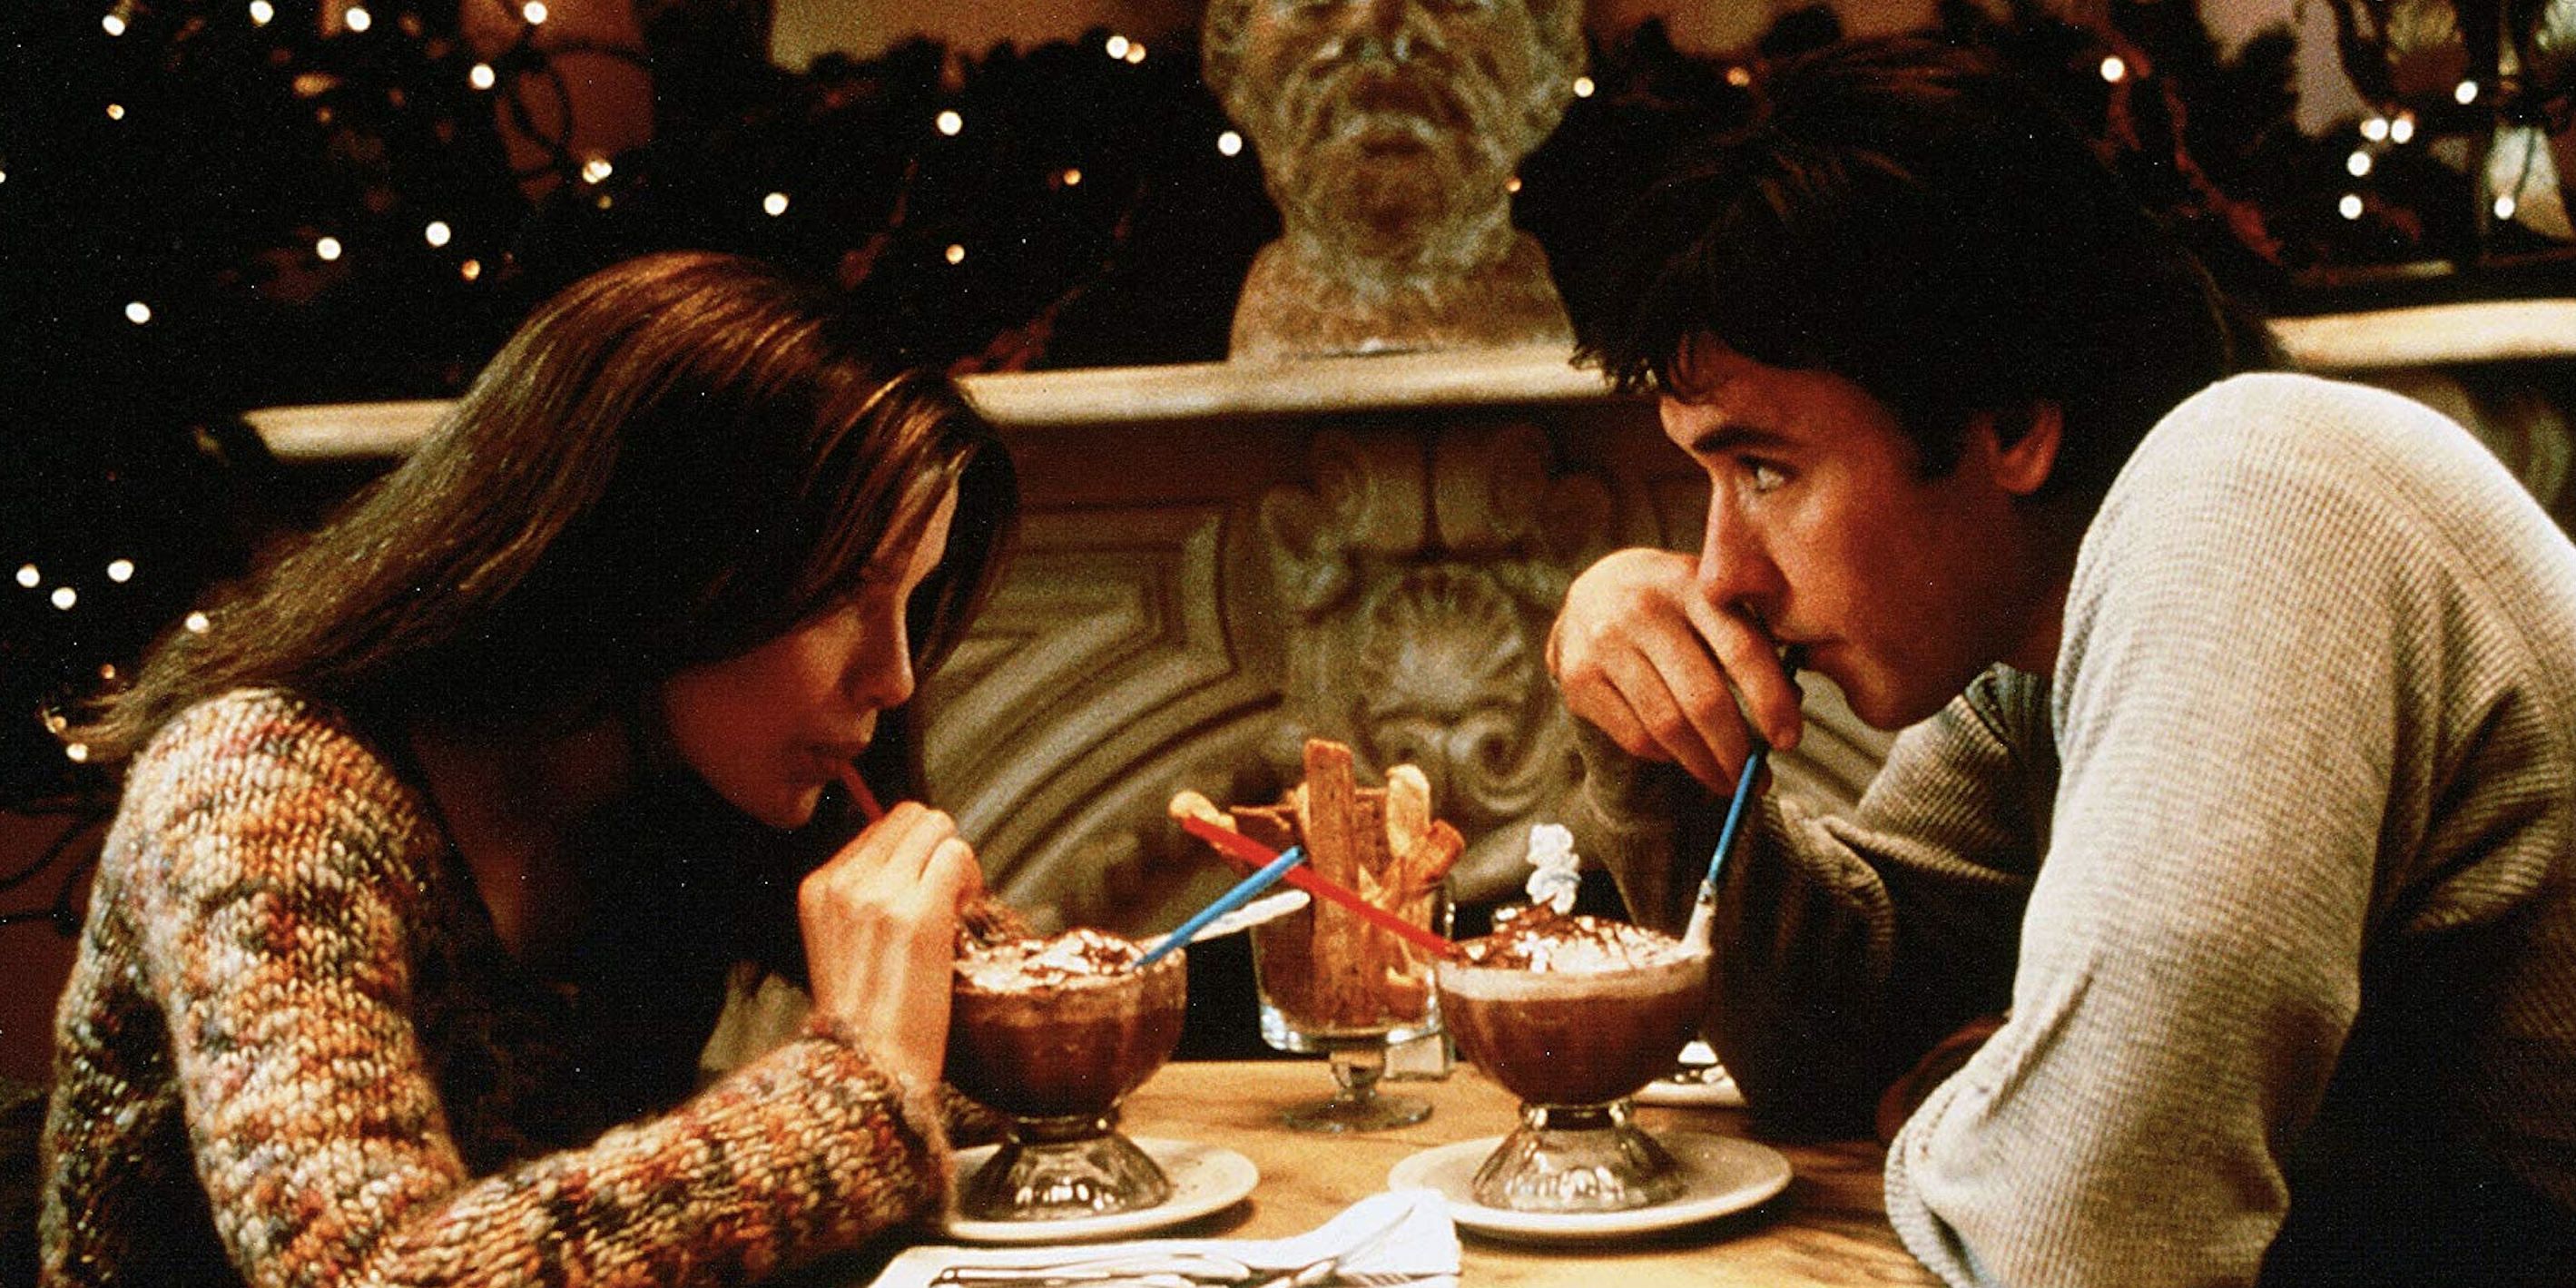 Kate Beckinsale and John Cusack in Serendipity